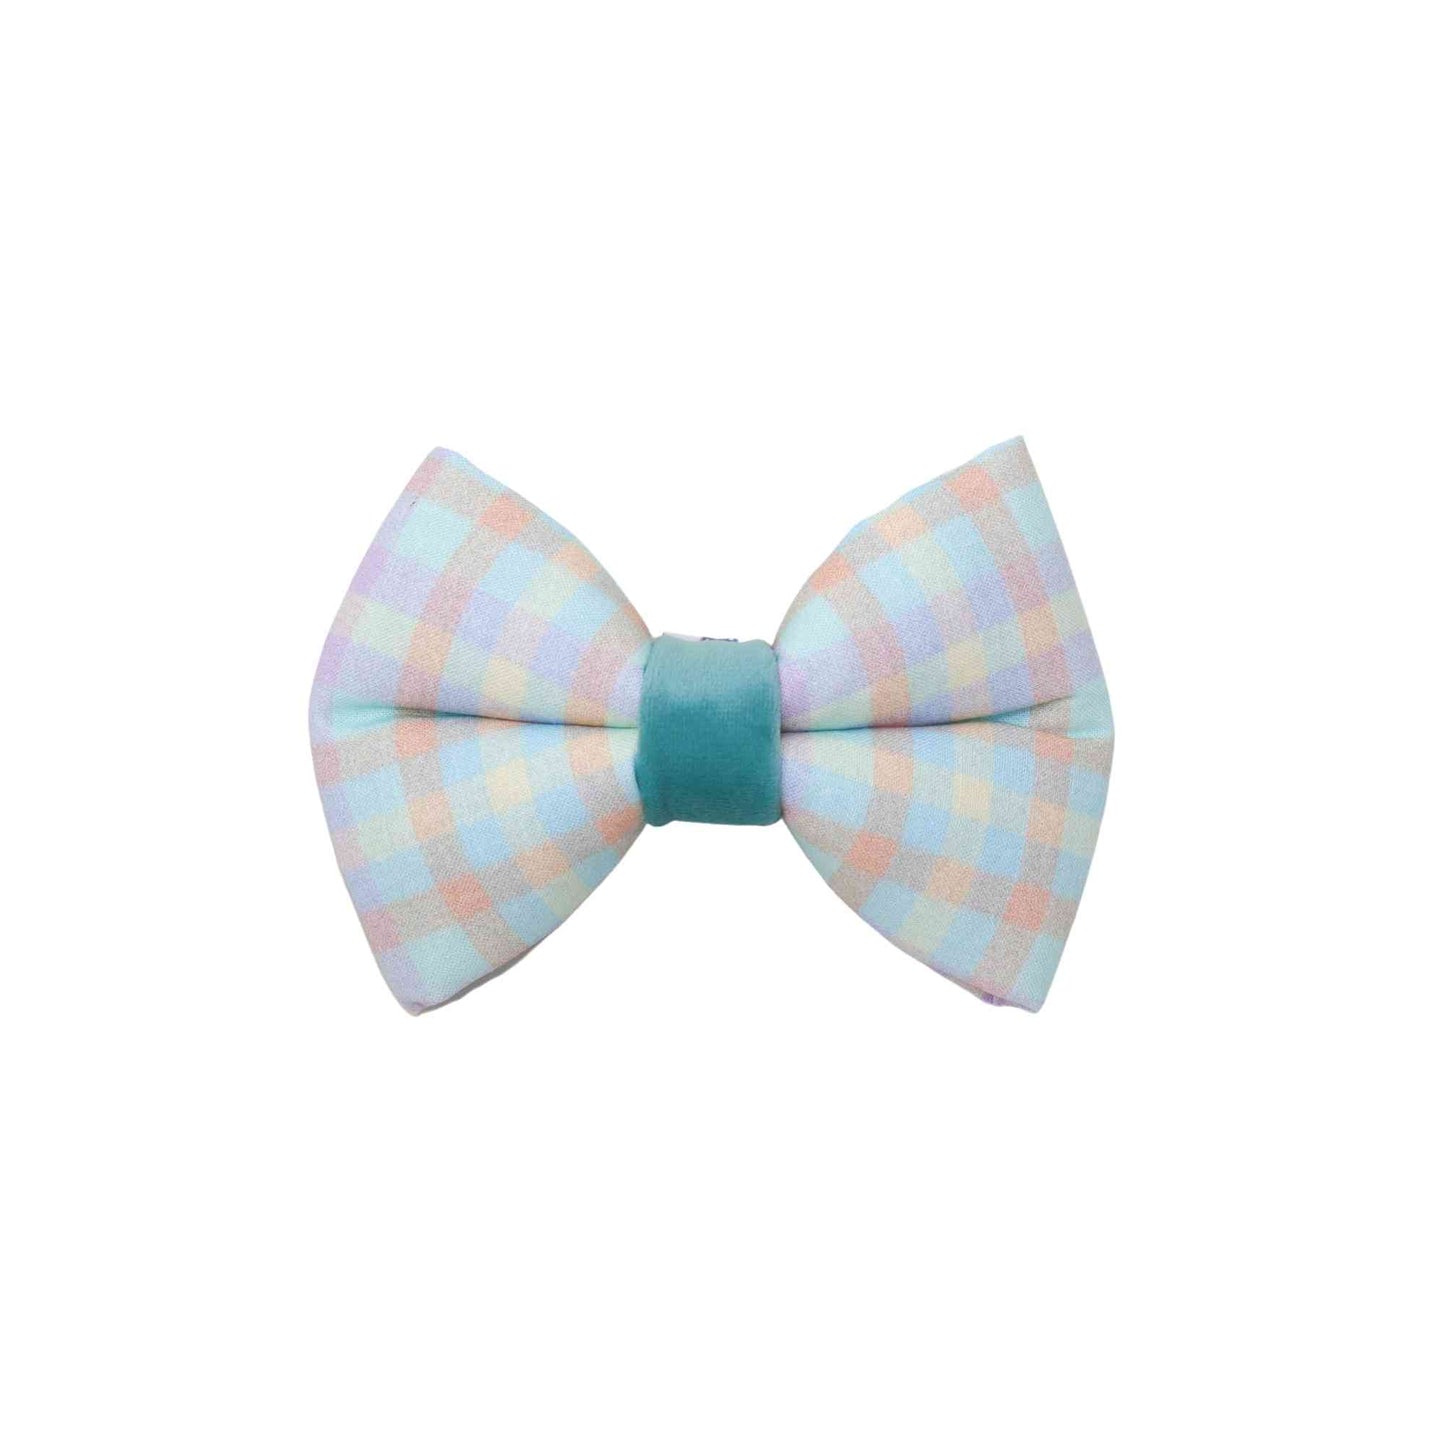 "Pastels" Puffy Bow Tie